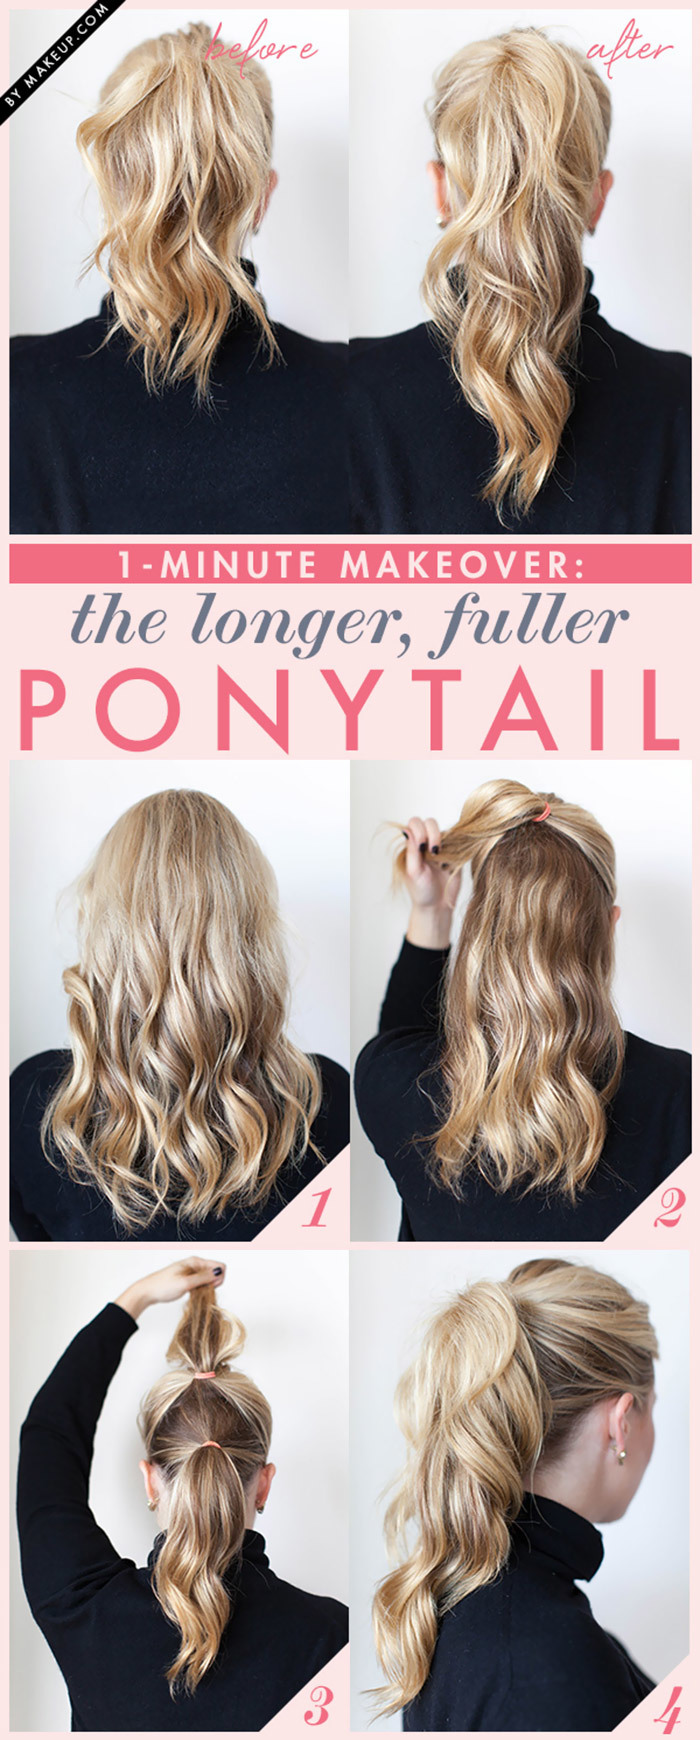 15 Hair Hacks, Tips and Tricks That Will Make Your Hair Look Better